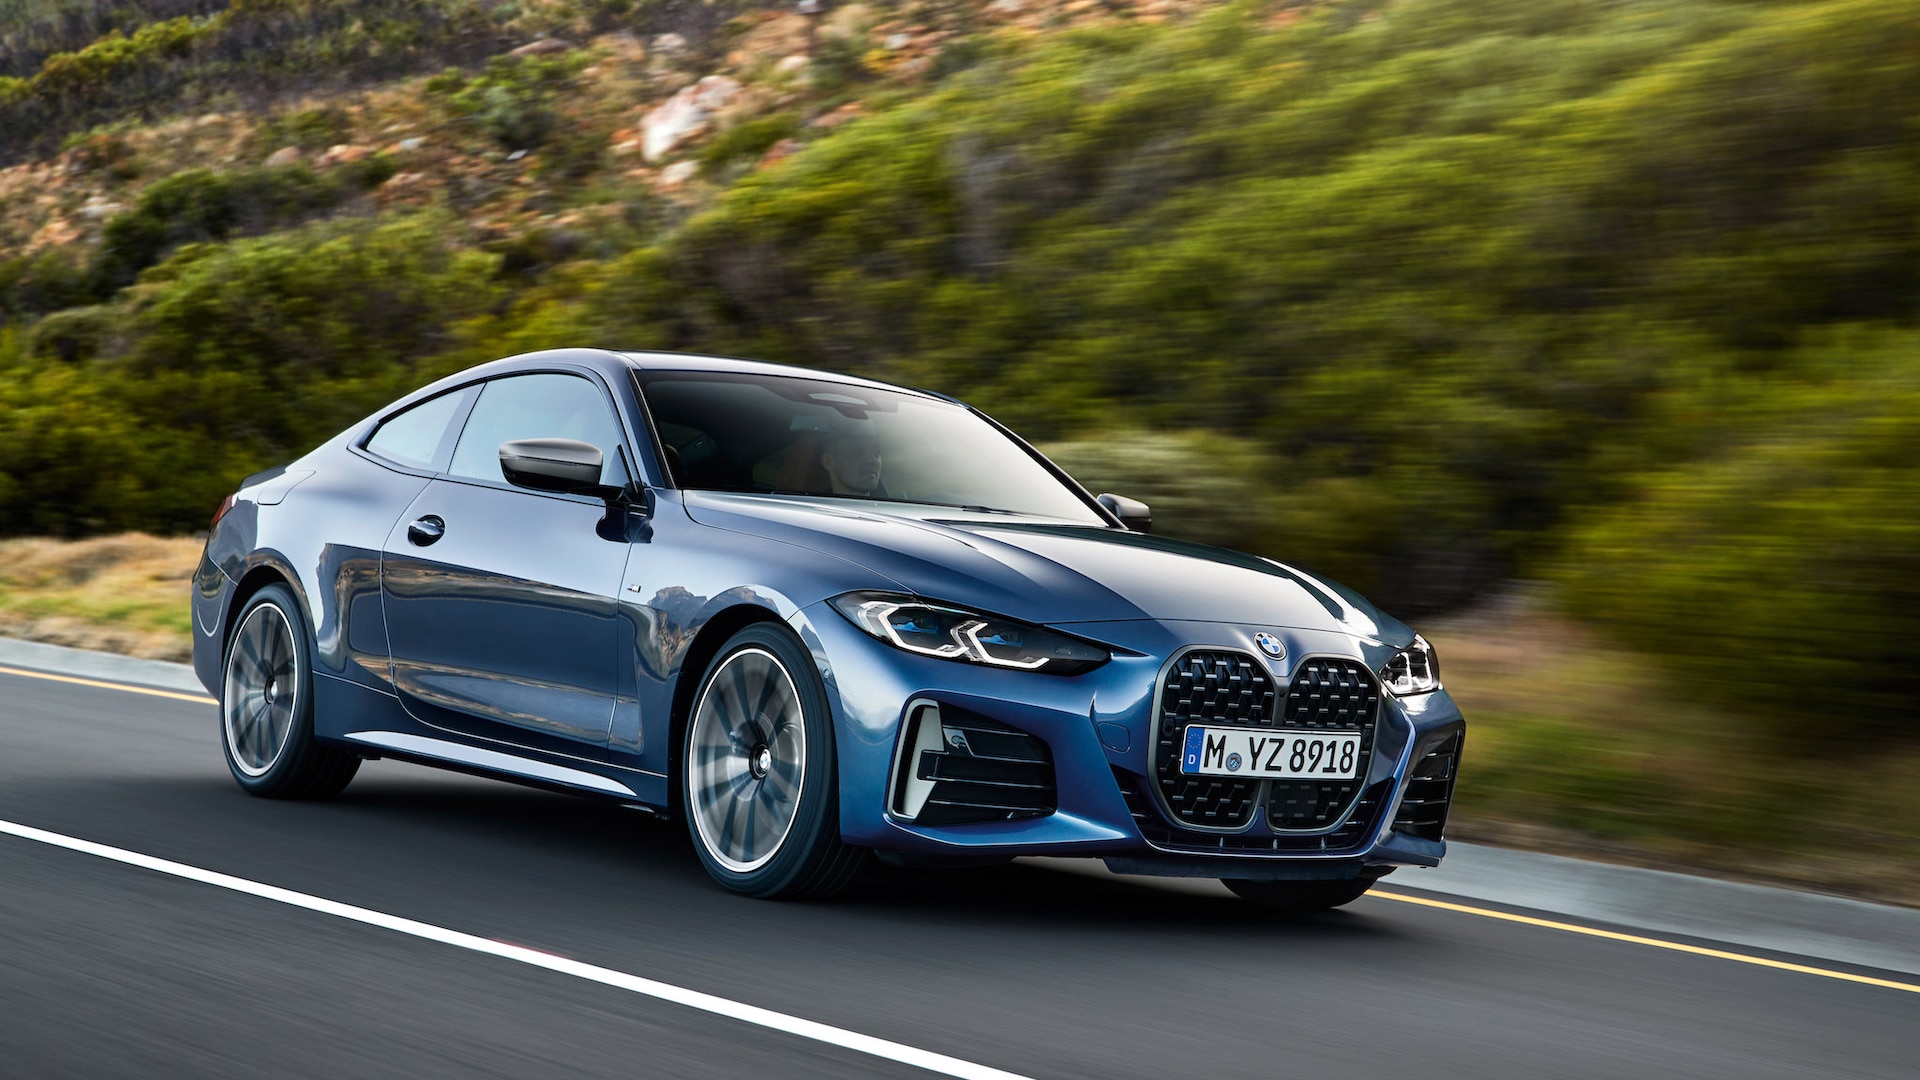 The 2021 BMW 4 Series Coupe Gets Bigger and Bolder, With Better Performance